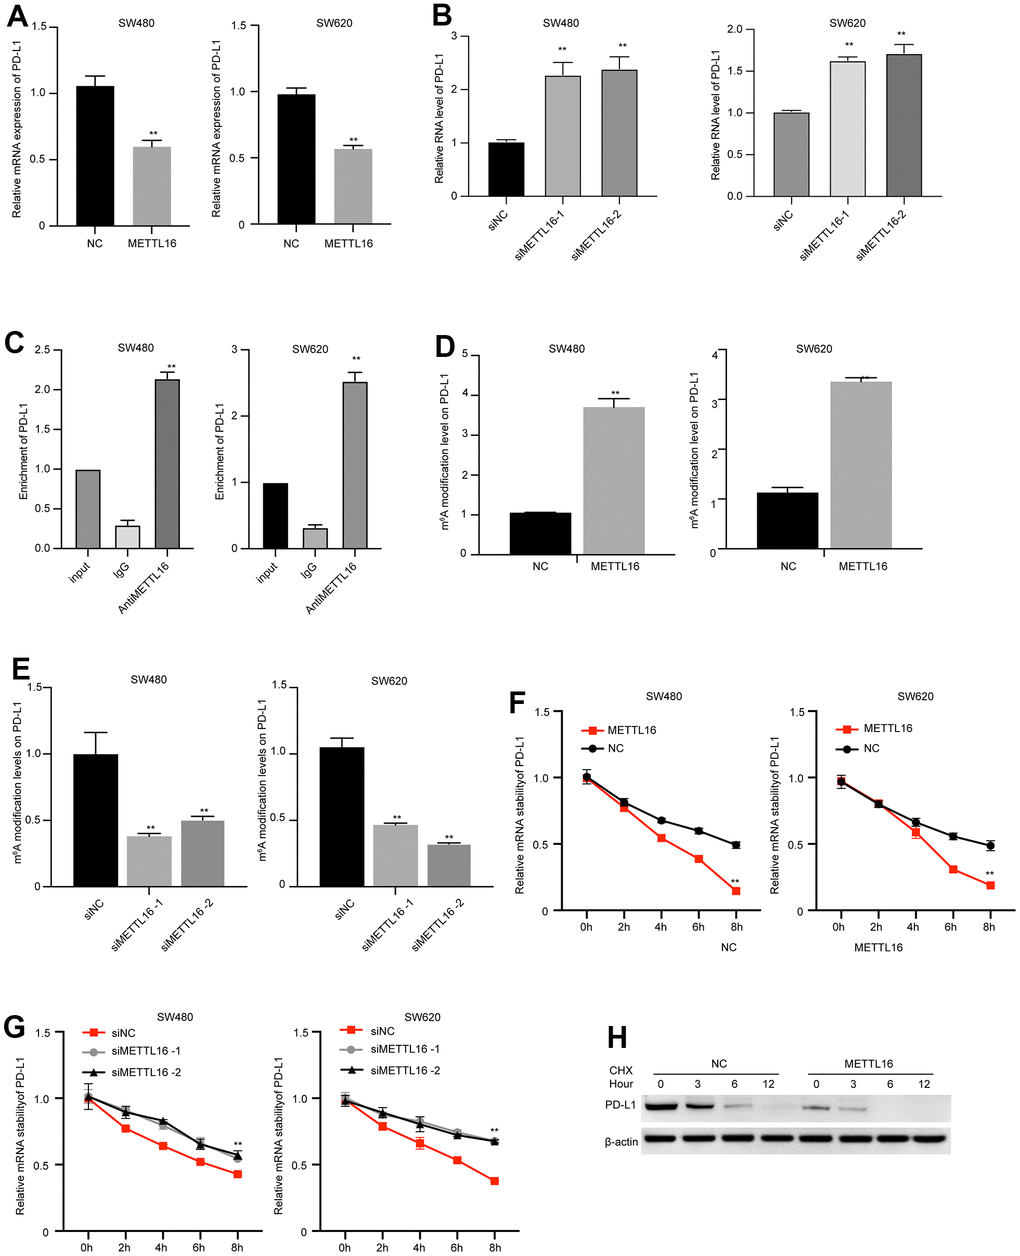 METTL16-mediated m6A modification regulates PD-L1 expression in CRC cells. (A, B) SW480 and SW620 cells were transfected with METTL16 overexpression vectors or siRNAs, then RNA level of PD-L1 was measured by qPCR assay. (C) The interaction between METTL16 with PD-L1 mRNA was measured by RIP assay. (D, E) SW480 and SW620 cells were transfected with METTL16 overexpression vectors or siRNAs, and MeRIP assay was conducted to assess m6A enrichment. (F, G) SW480 and SW620 cells were transfected with METTL16 overexpression vectors or siRNAs and treated with RNA synthesis inhibitor α-amanitin (50 μM). The stability of PD-L1 mRNA was checked by qPCR. (H) SW480 cells were treated with CHX for indicated time points and the expression of PD-L1 was measured by western blot. **p